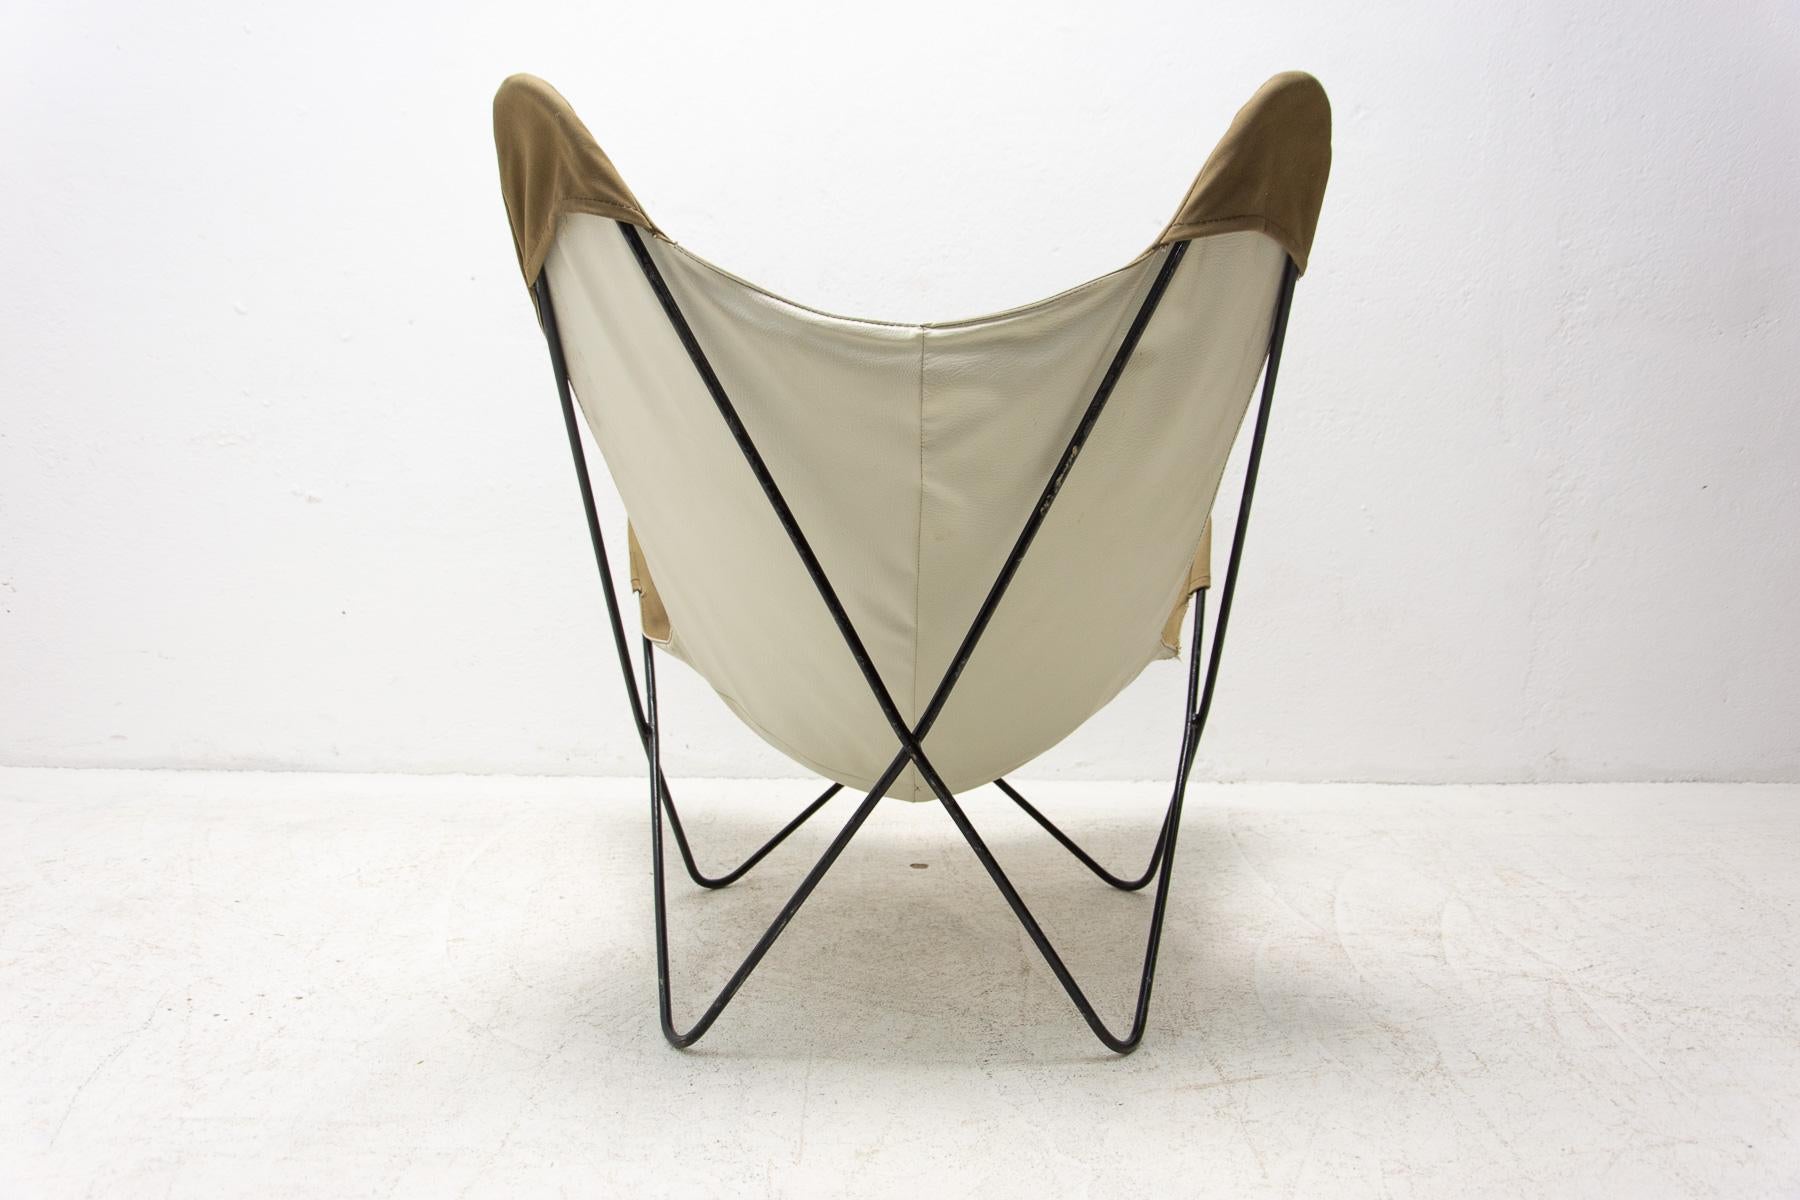 Fabric Sculptural Butterfly Chair Originaly Designed by Jorge Ferrari-Hardoy